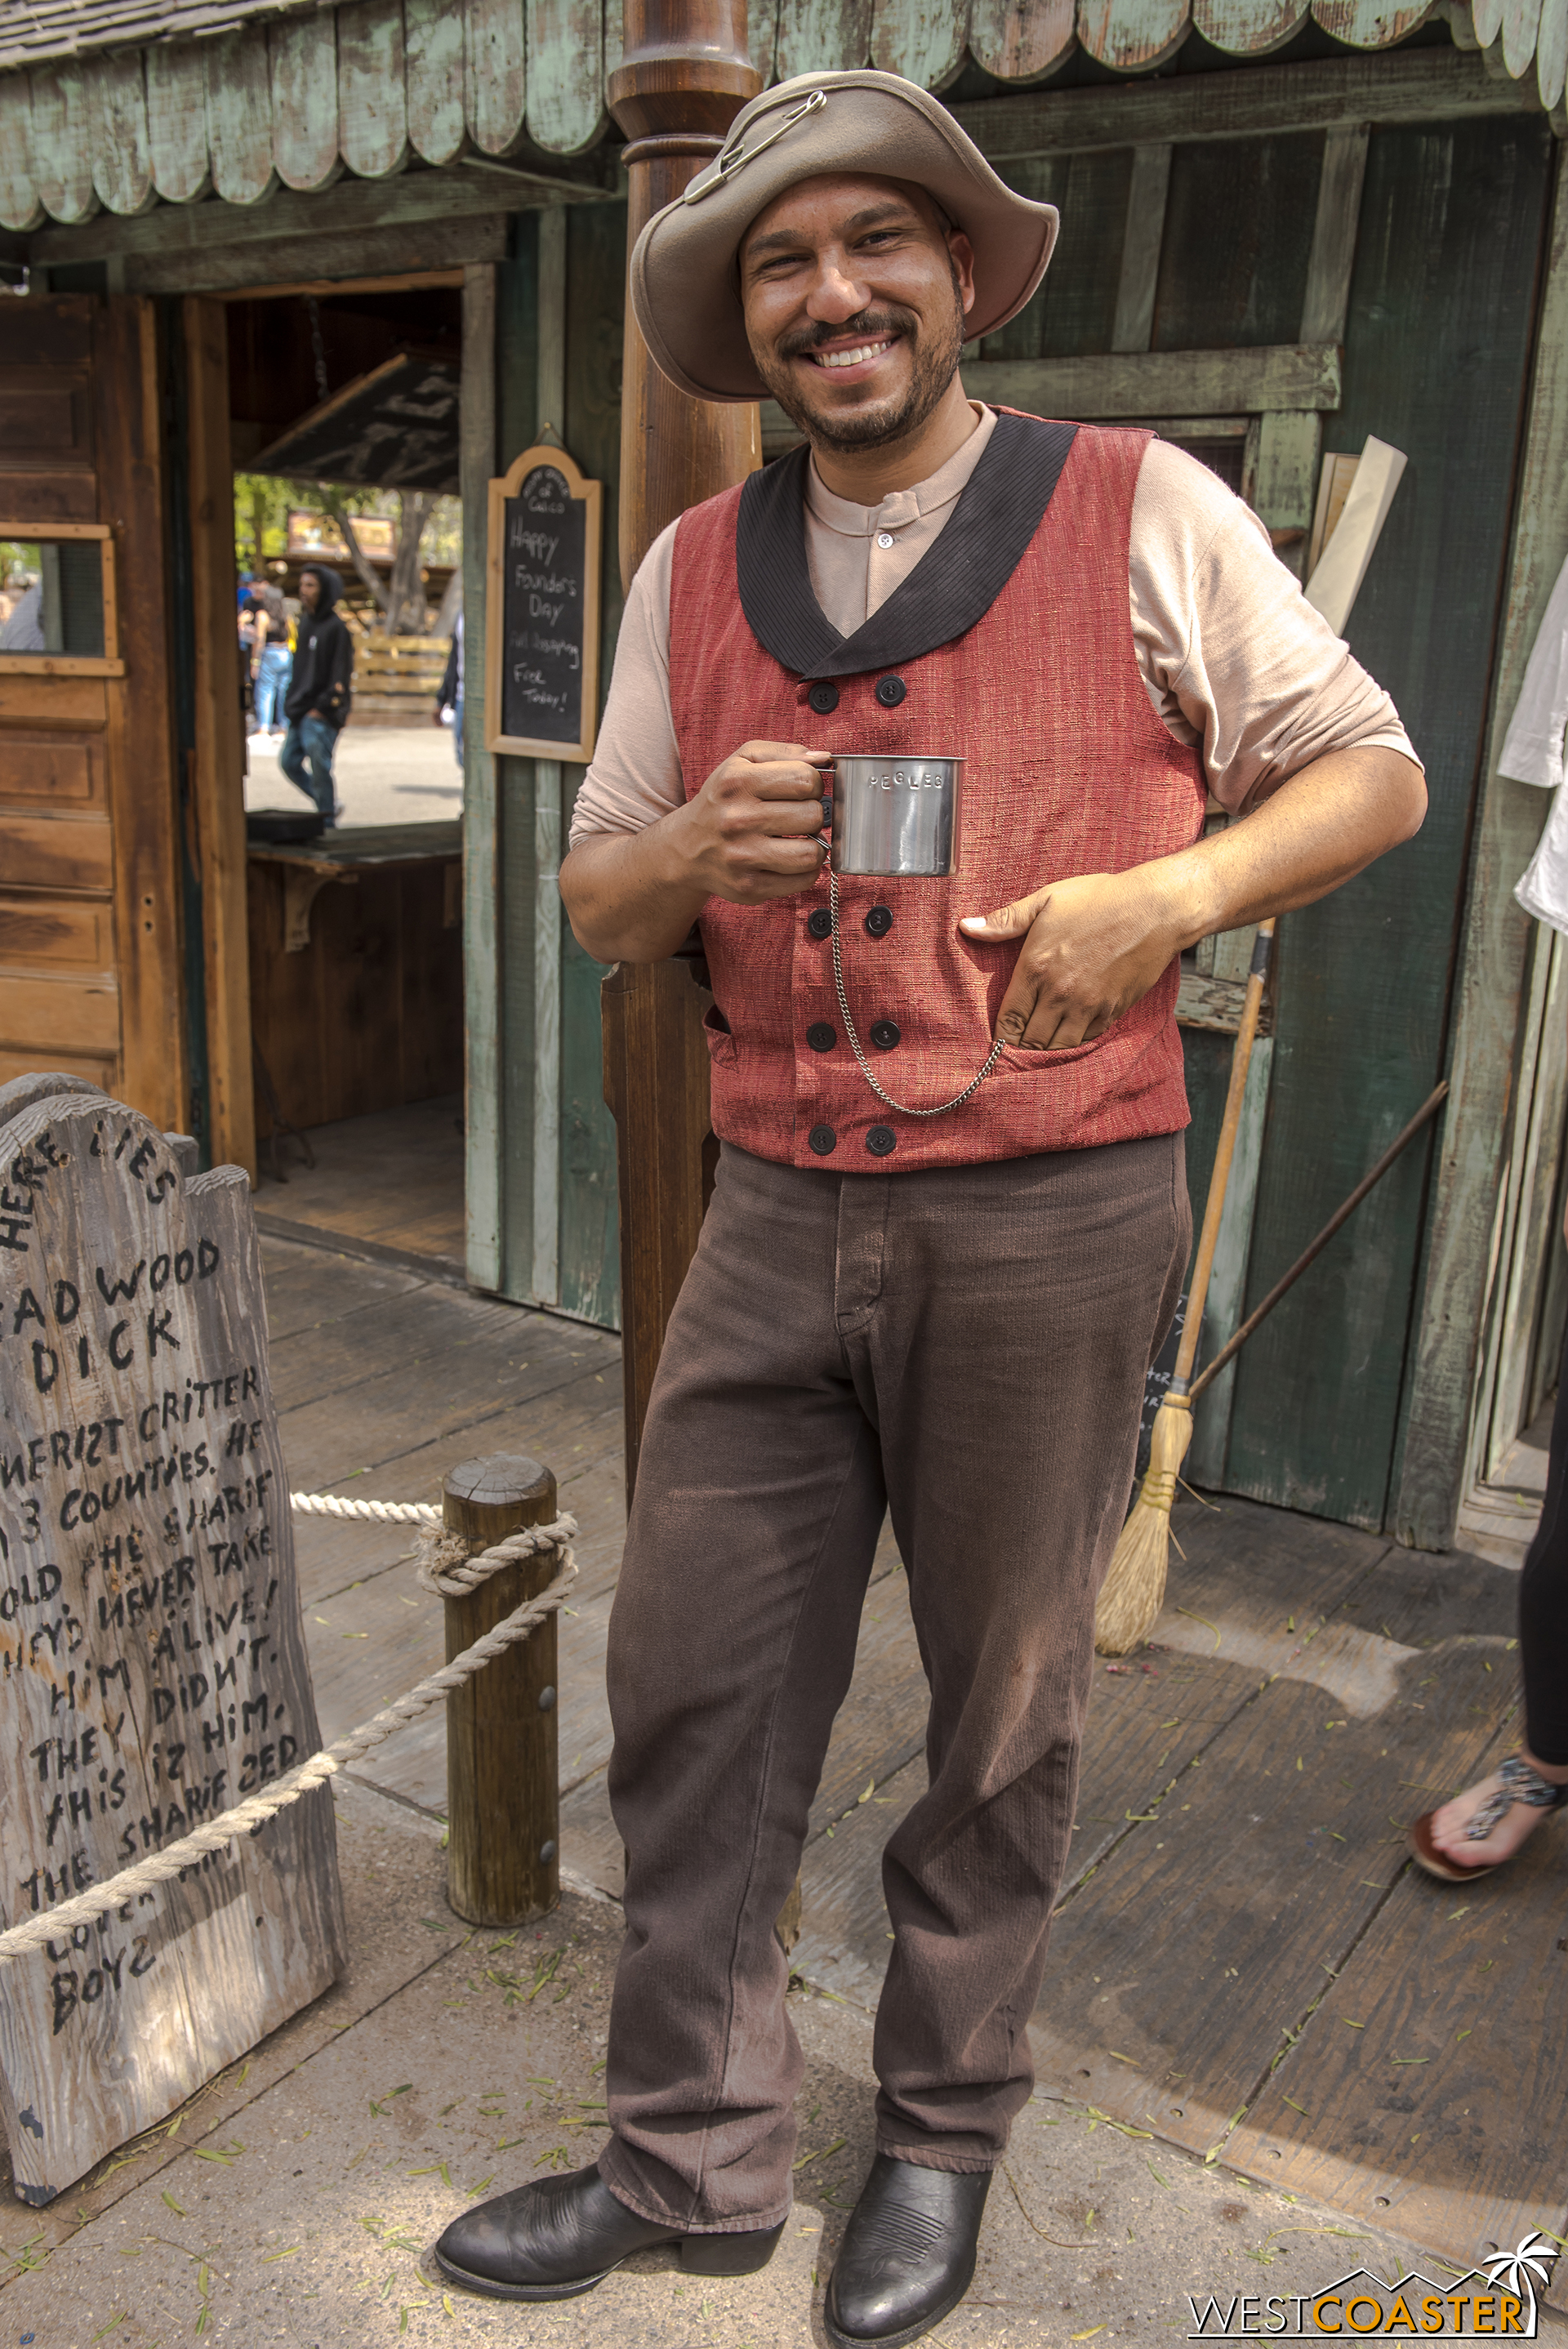  Joining him most of the time at the Assay Office is “Peg Leg” Cinch, who discovered gold in the Calico Mine at the conclusion of last year’s Ghost Town Alive! and owns the largest gold nugget found in these parts.  Apparently, “Peg Leg” is just a ni